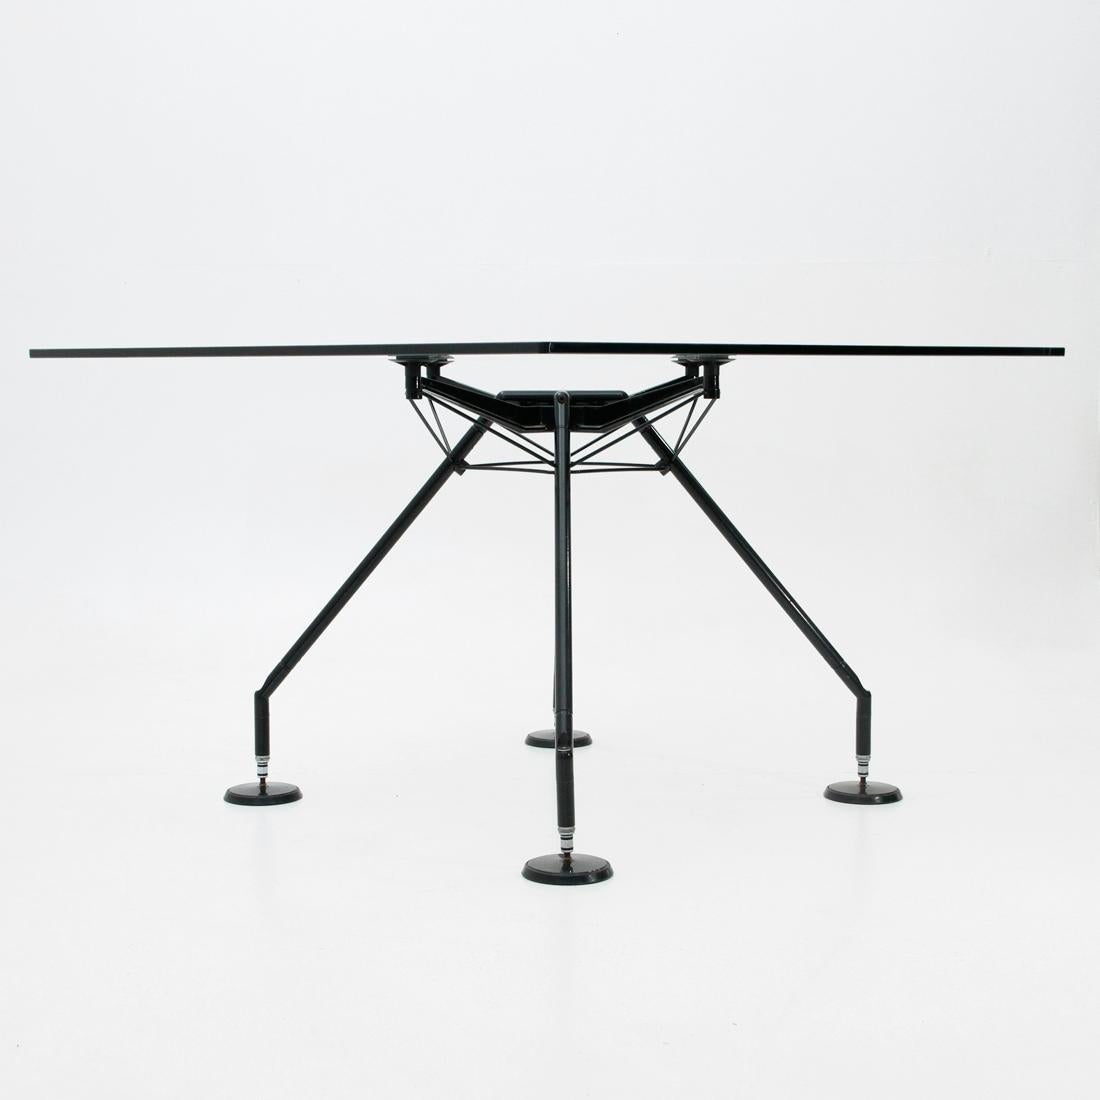 Table produced in the 1980s by Tecno on a project by Norman Foster.
Black painted metal structure.
Square glass top.
Good general conditions, some signs due to normal use over time.

Dimensions: Length 118.5 cm, depth 118.5 cm, height 74 cm.